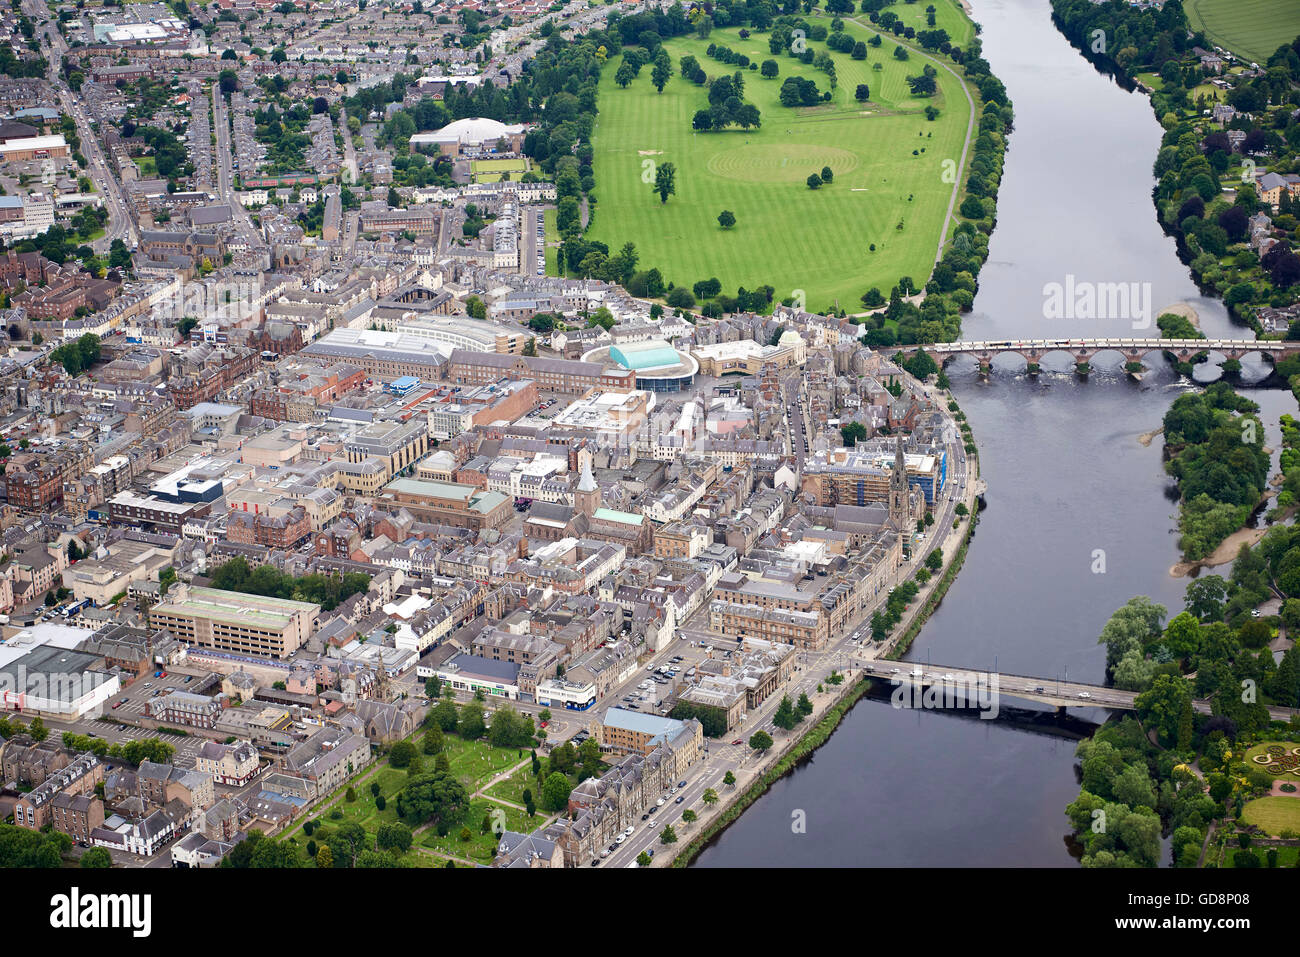 The river Tay and the City of Perth, Perthshire, Scotland, from the air Stock Photo